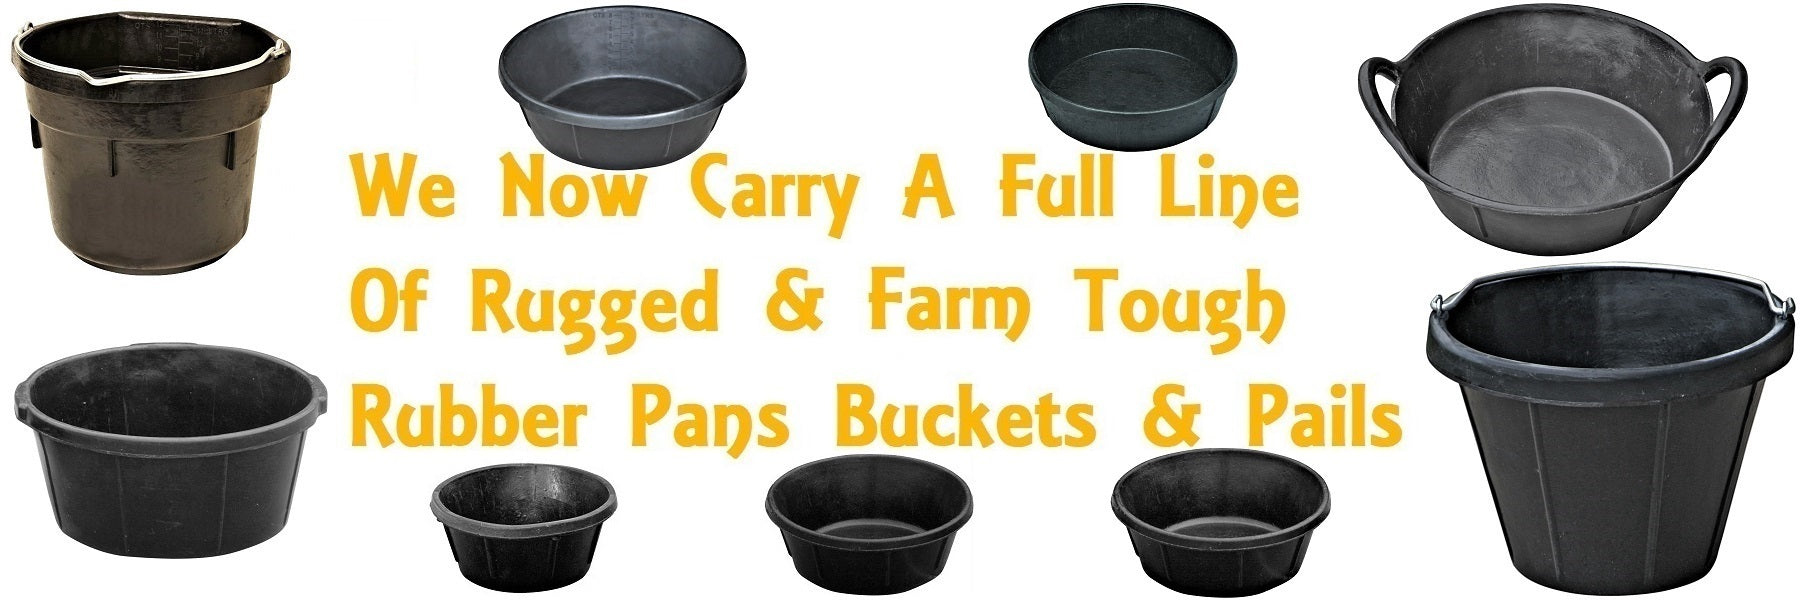 Plastic buckets and pails